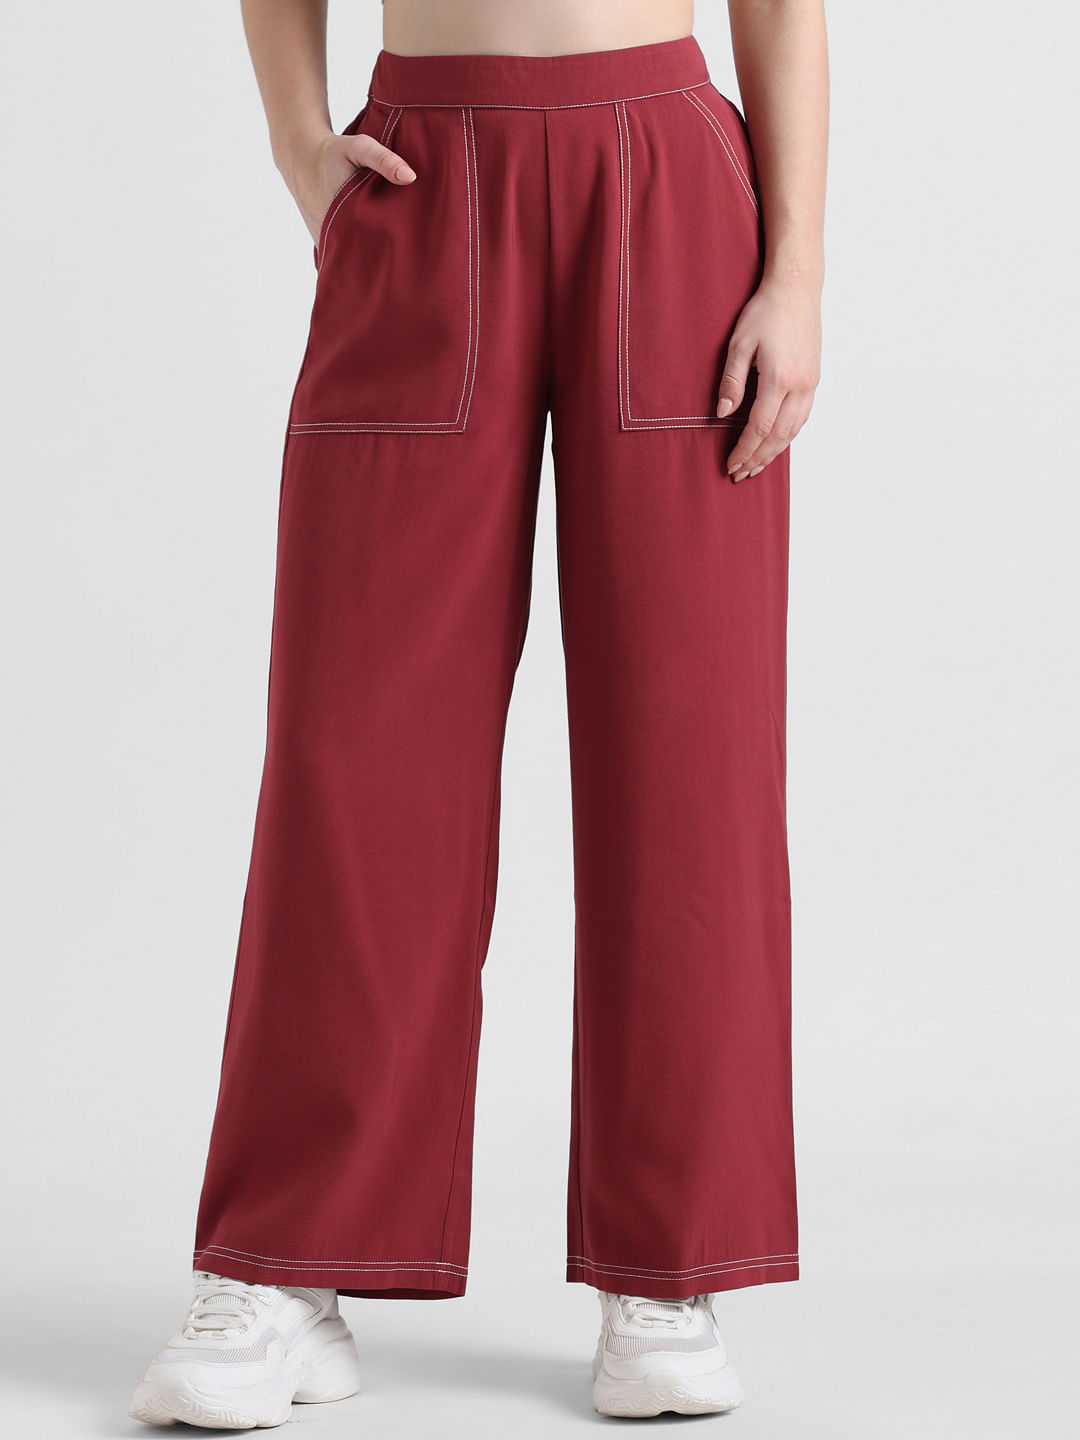 Red Wide Leg Pants | Made in South Africa | Equilibrio